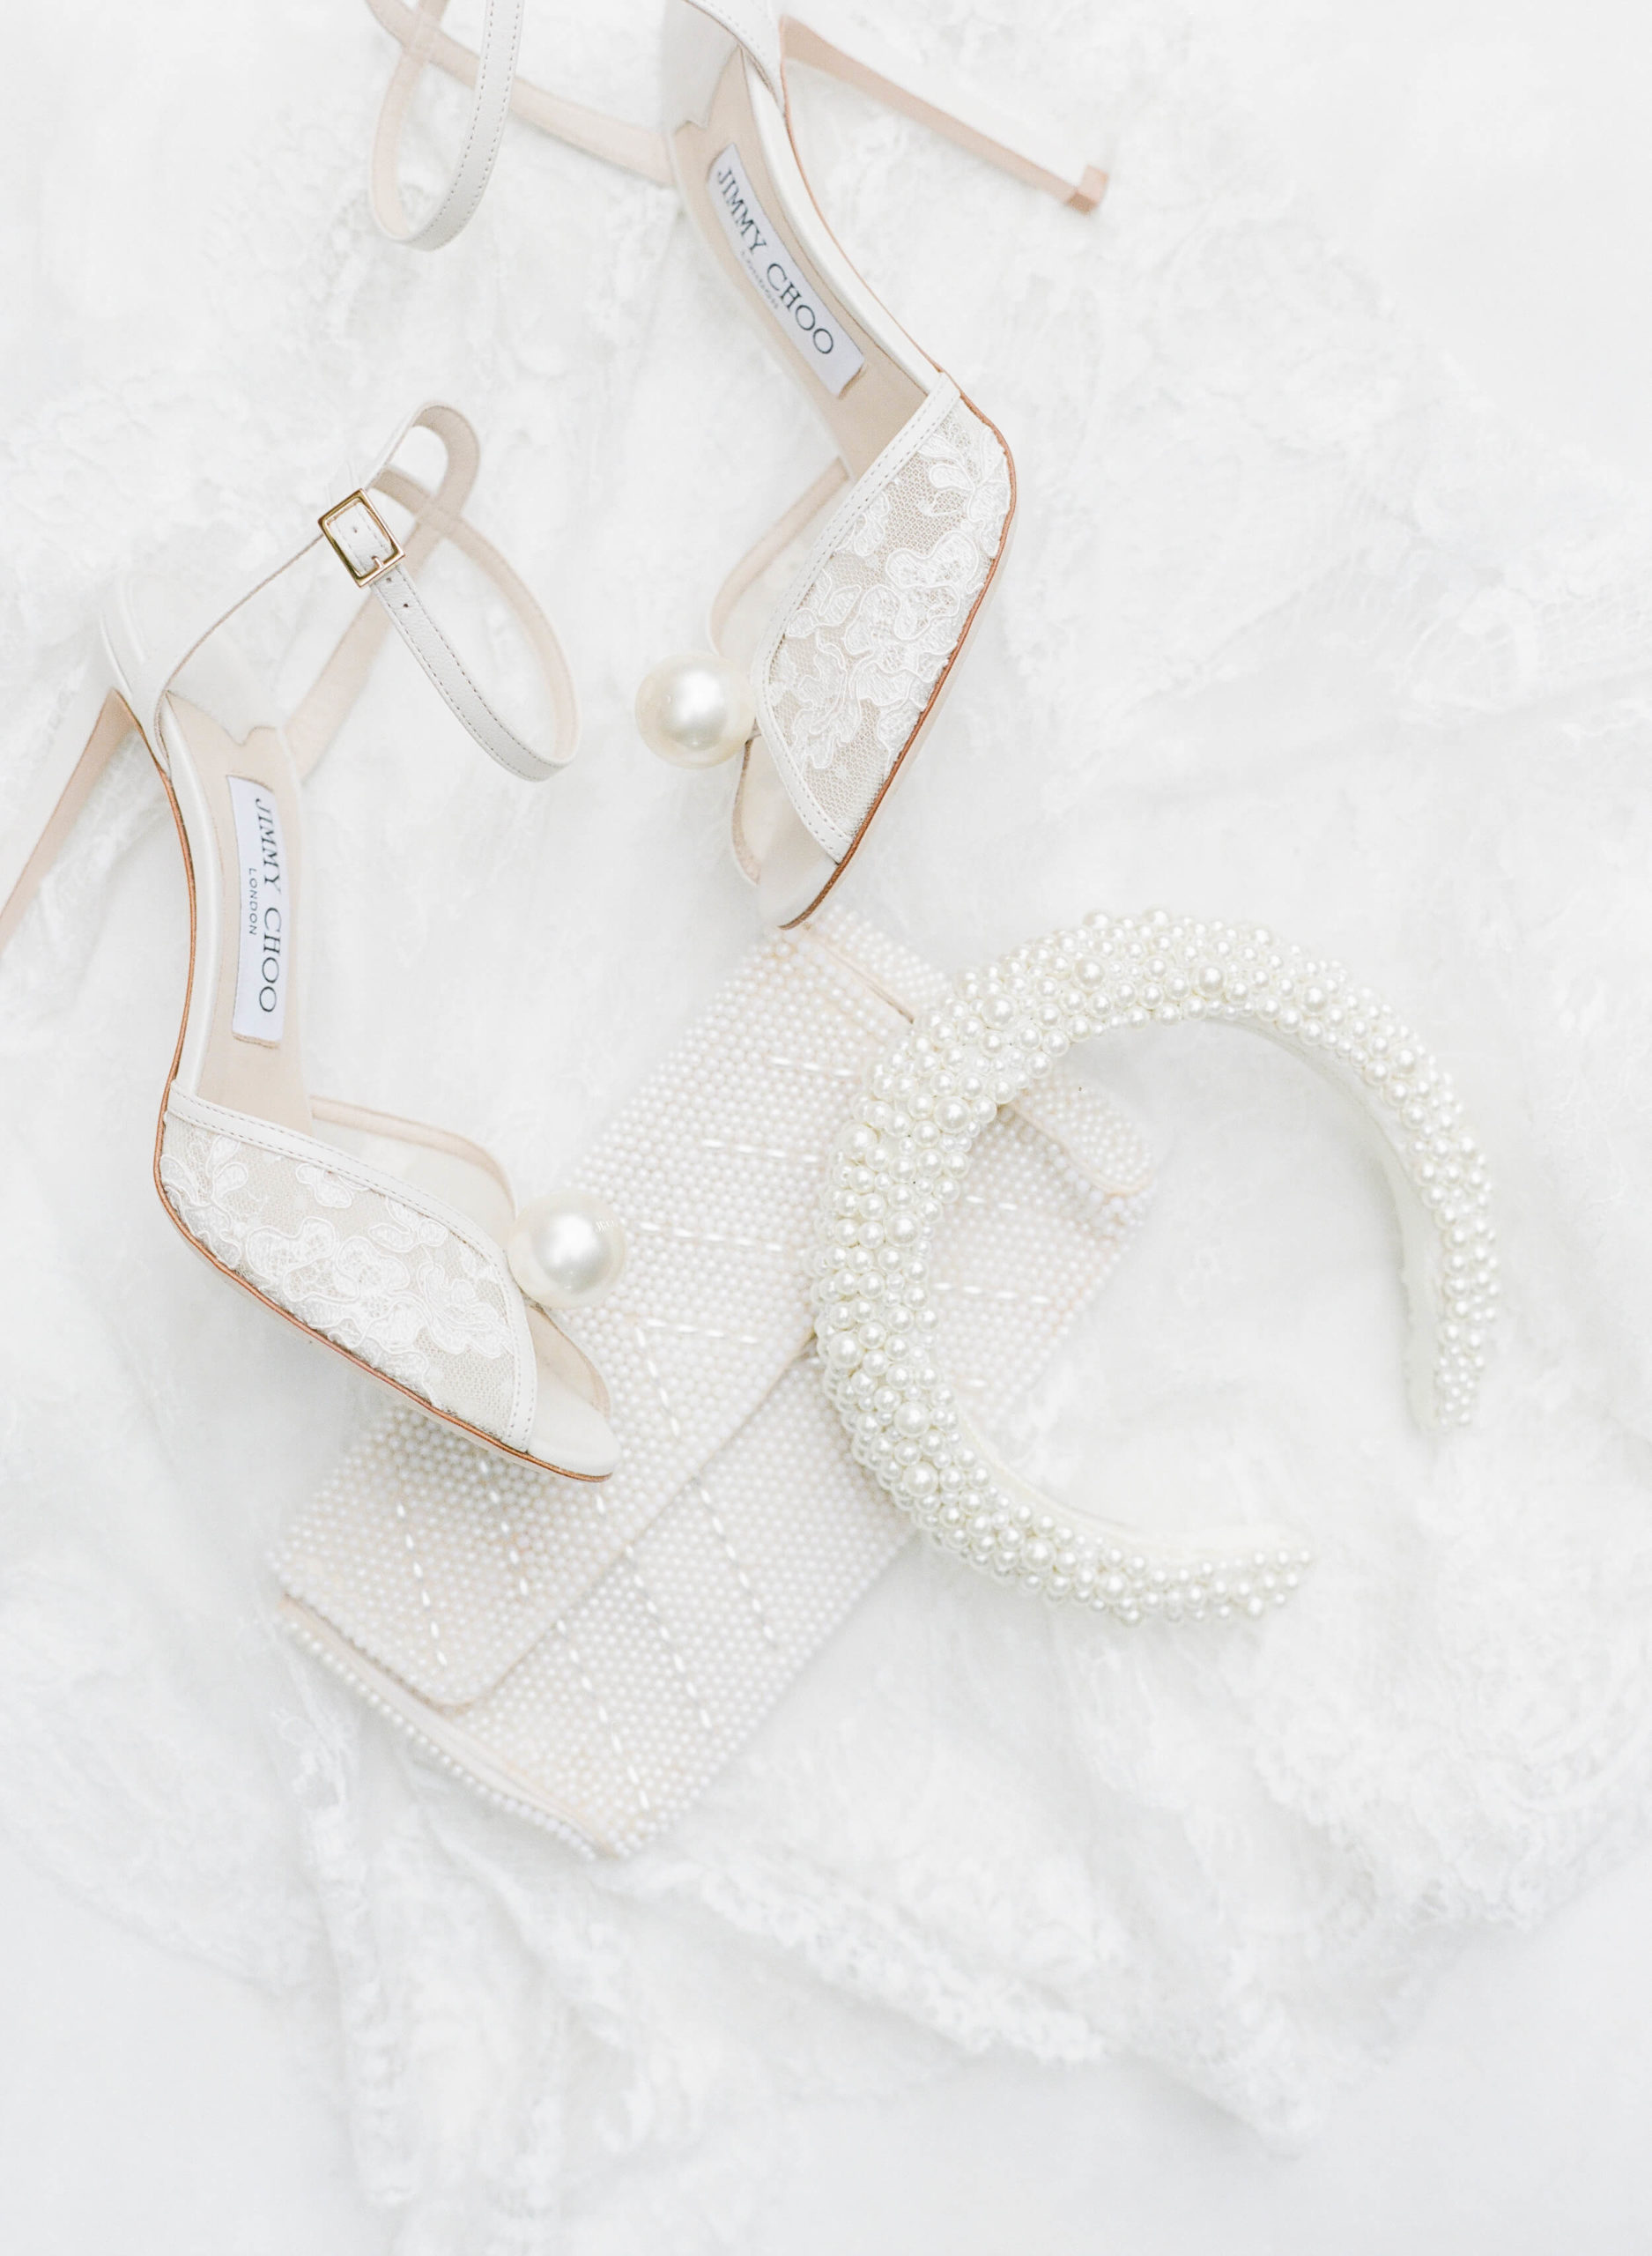 Bride's shoes and accessories